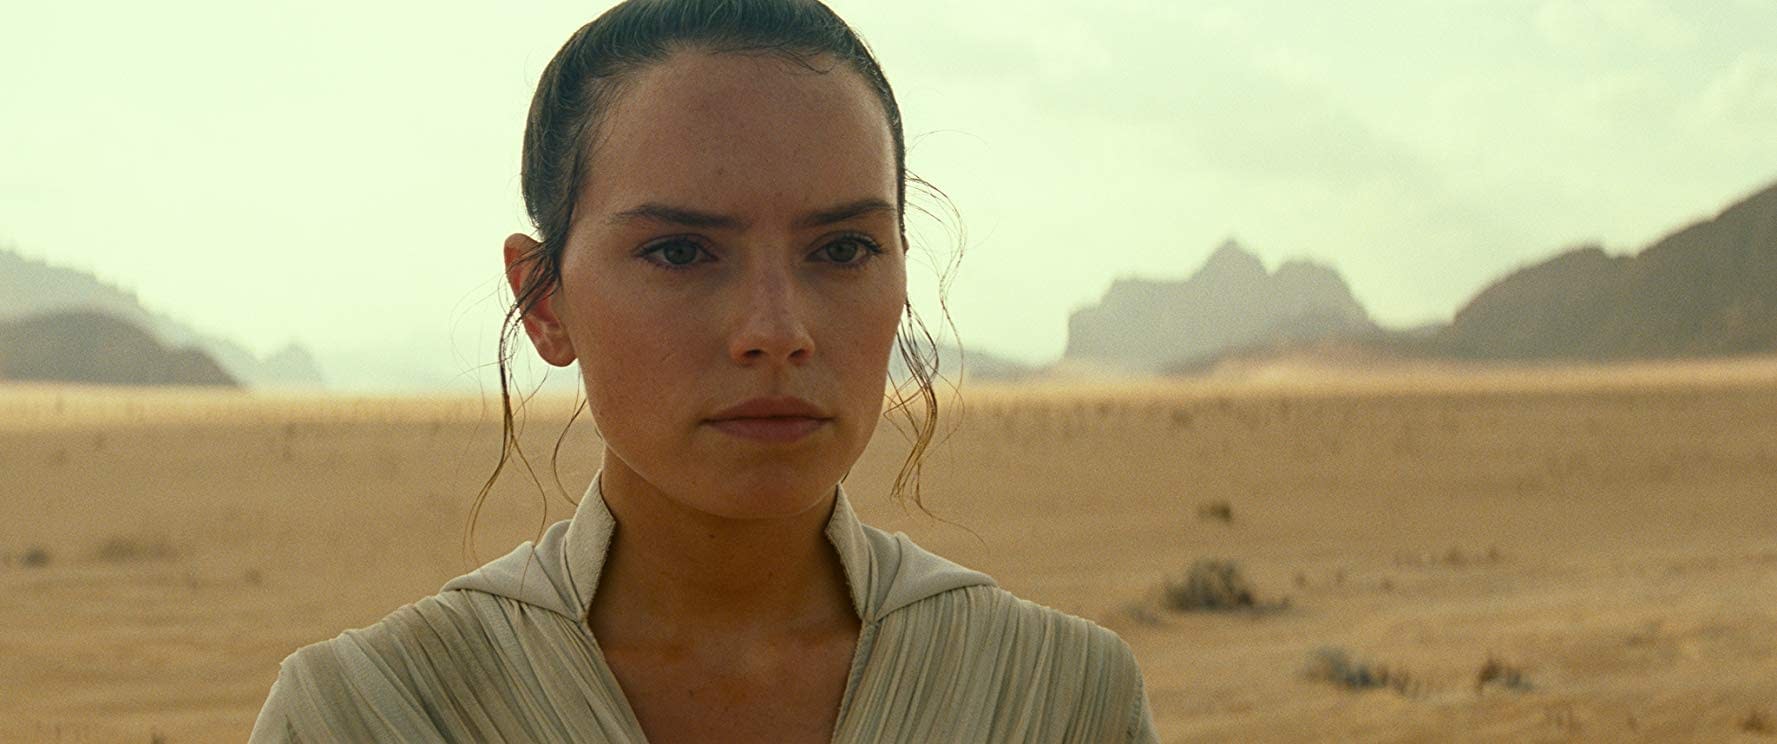 "Star Wars": Daisy Ridley Says Filming "The Rise of Skywalker" was "the Best"